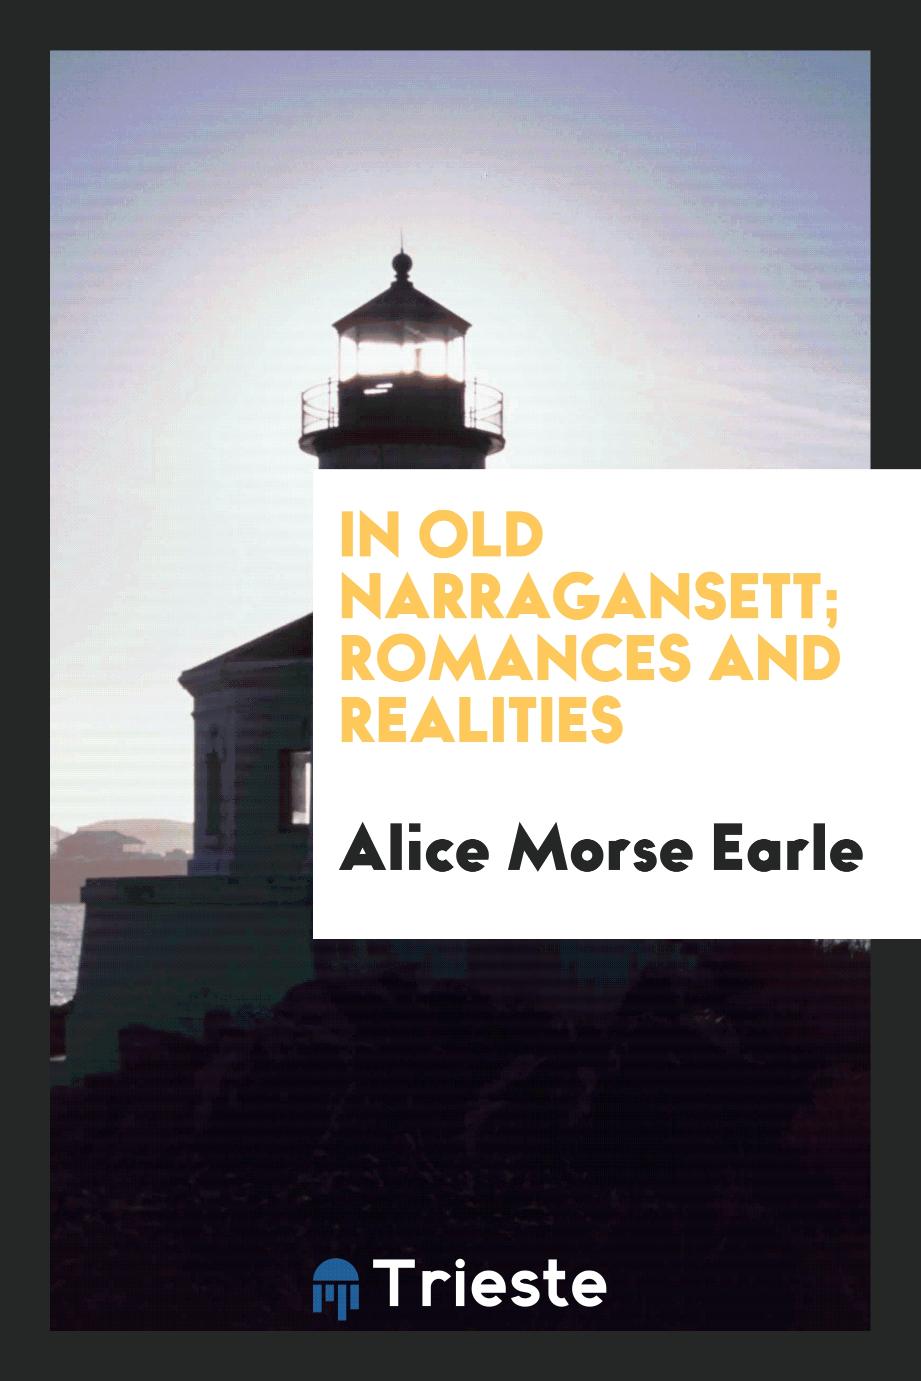 In old Narragansett; romances and realities